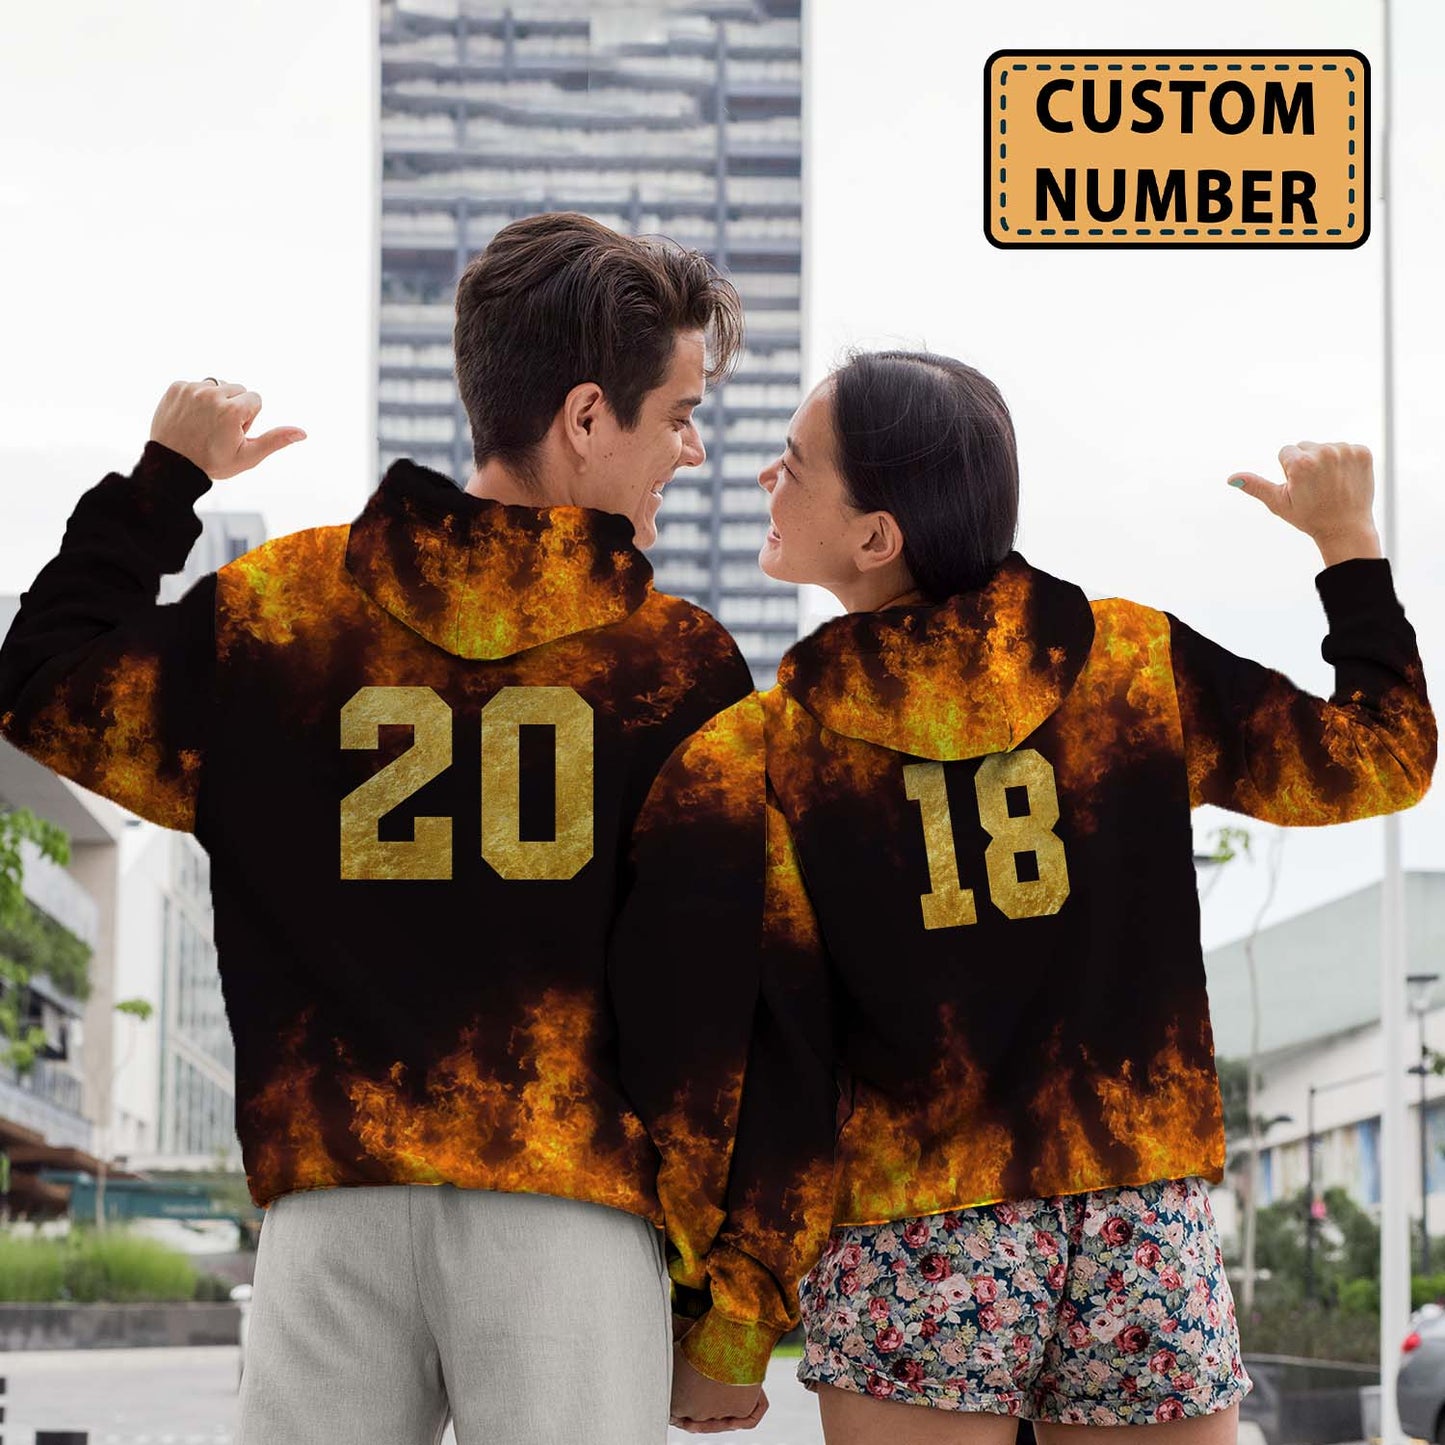 Matching 3D All Over Print Hoodie King And Queen 3 Personalizedwitch For Couple